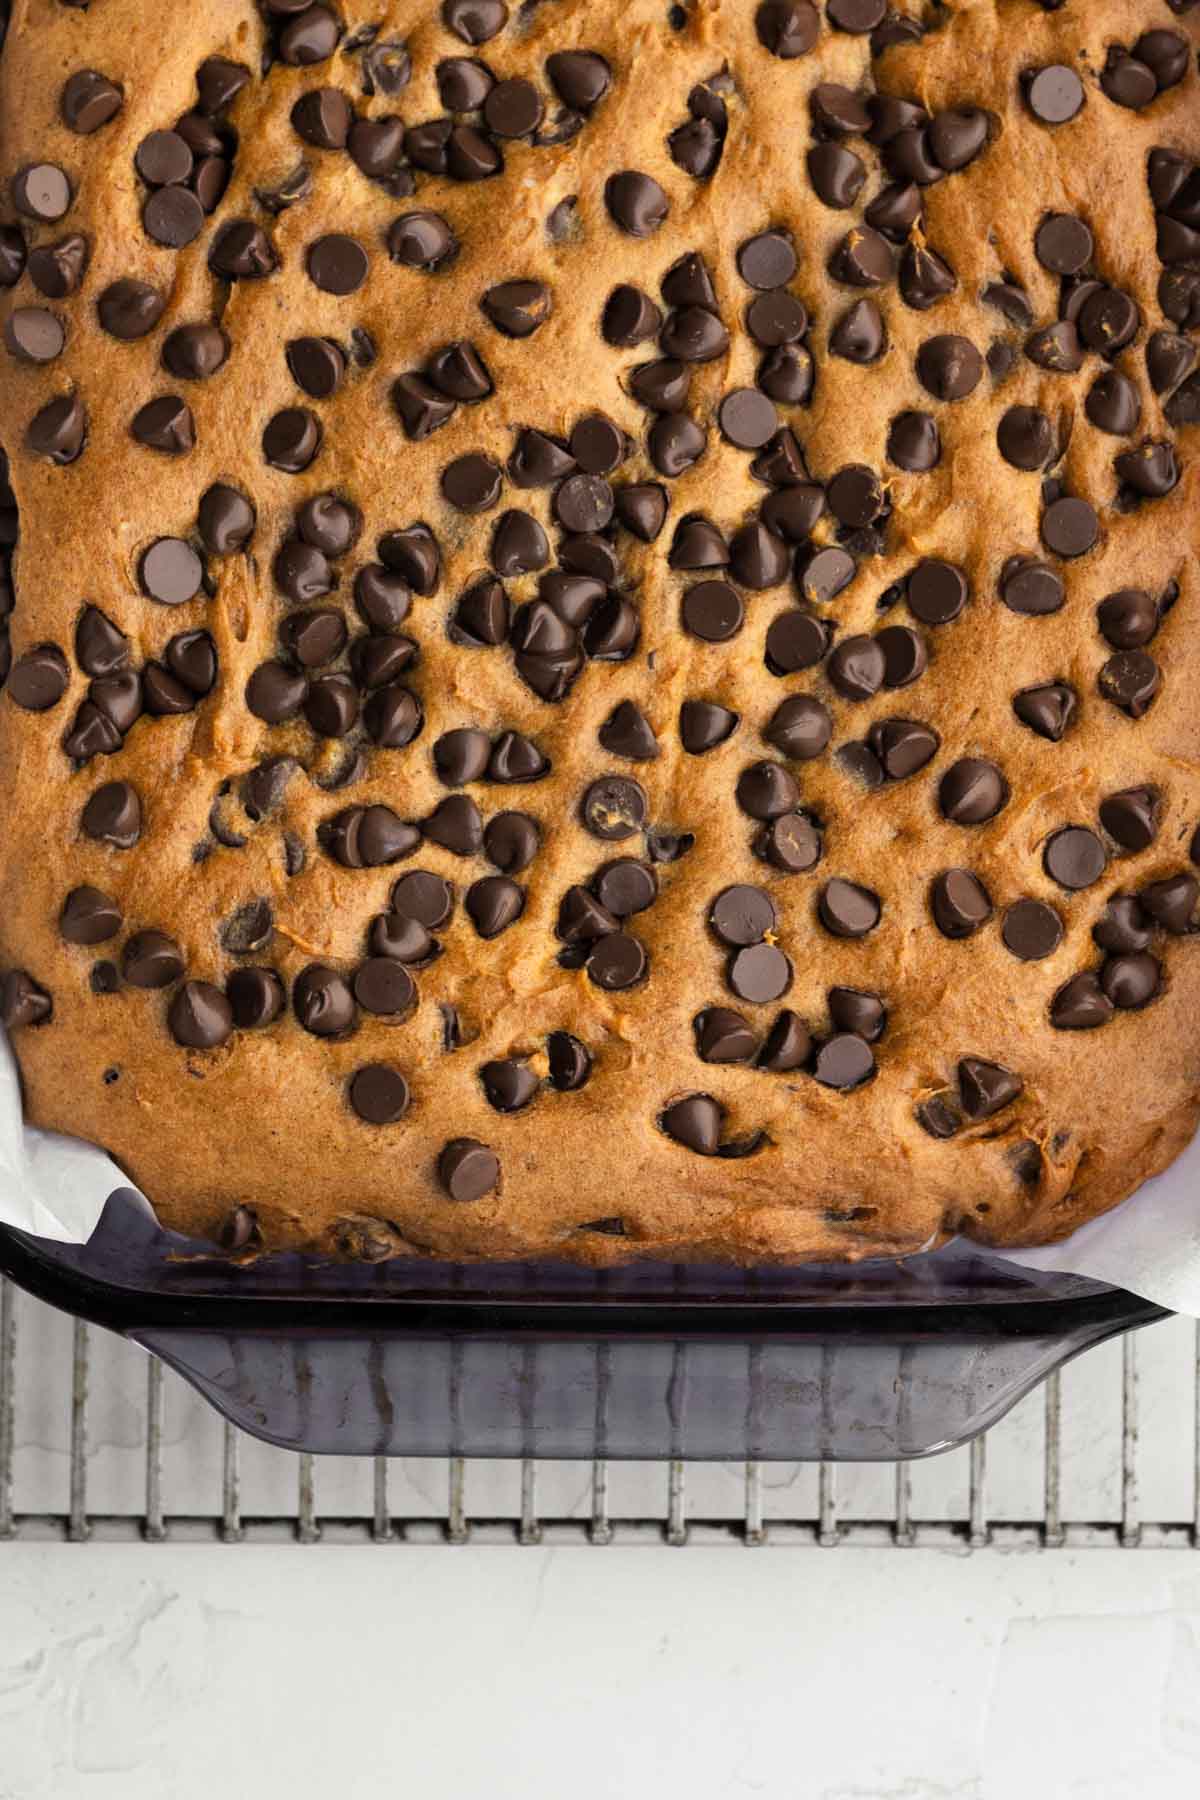 The dish of Chocolate Chip Pumpkin Bars is baked to a perfect golden brown.